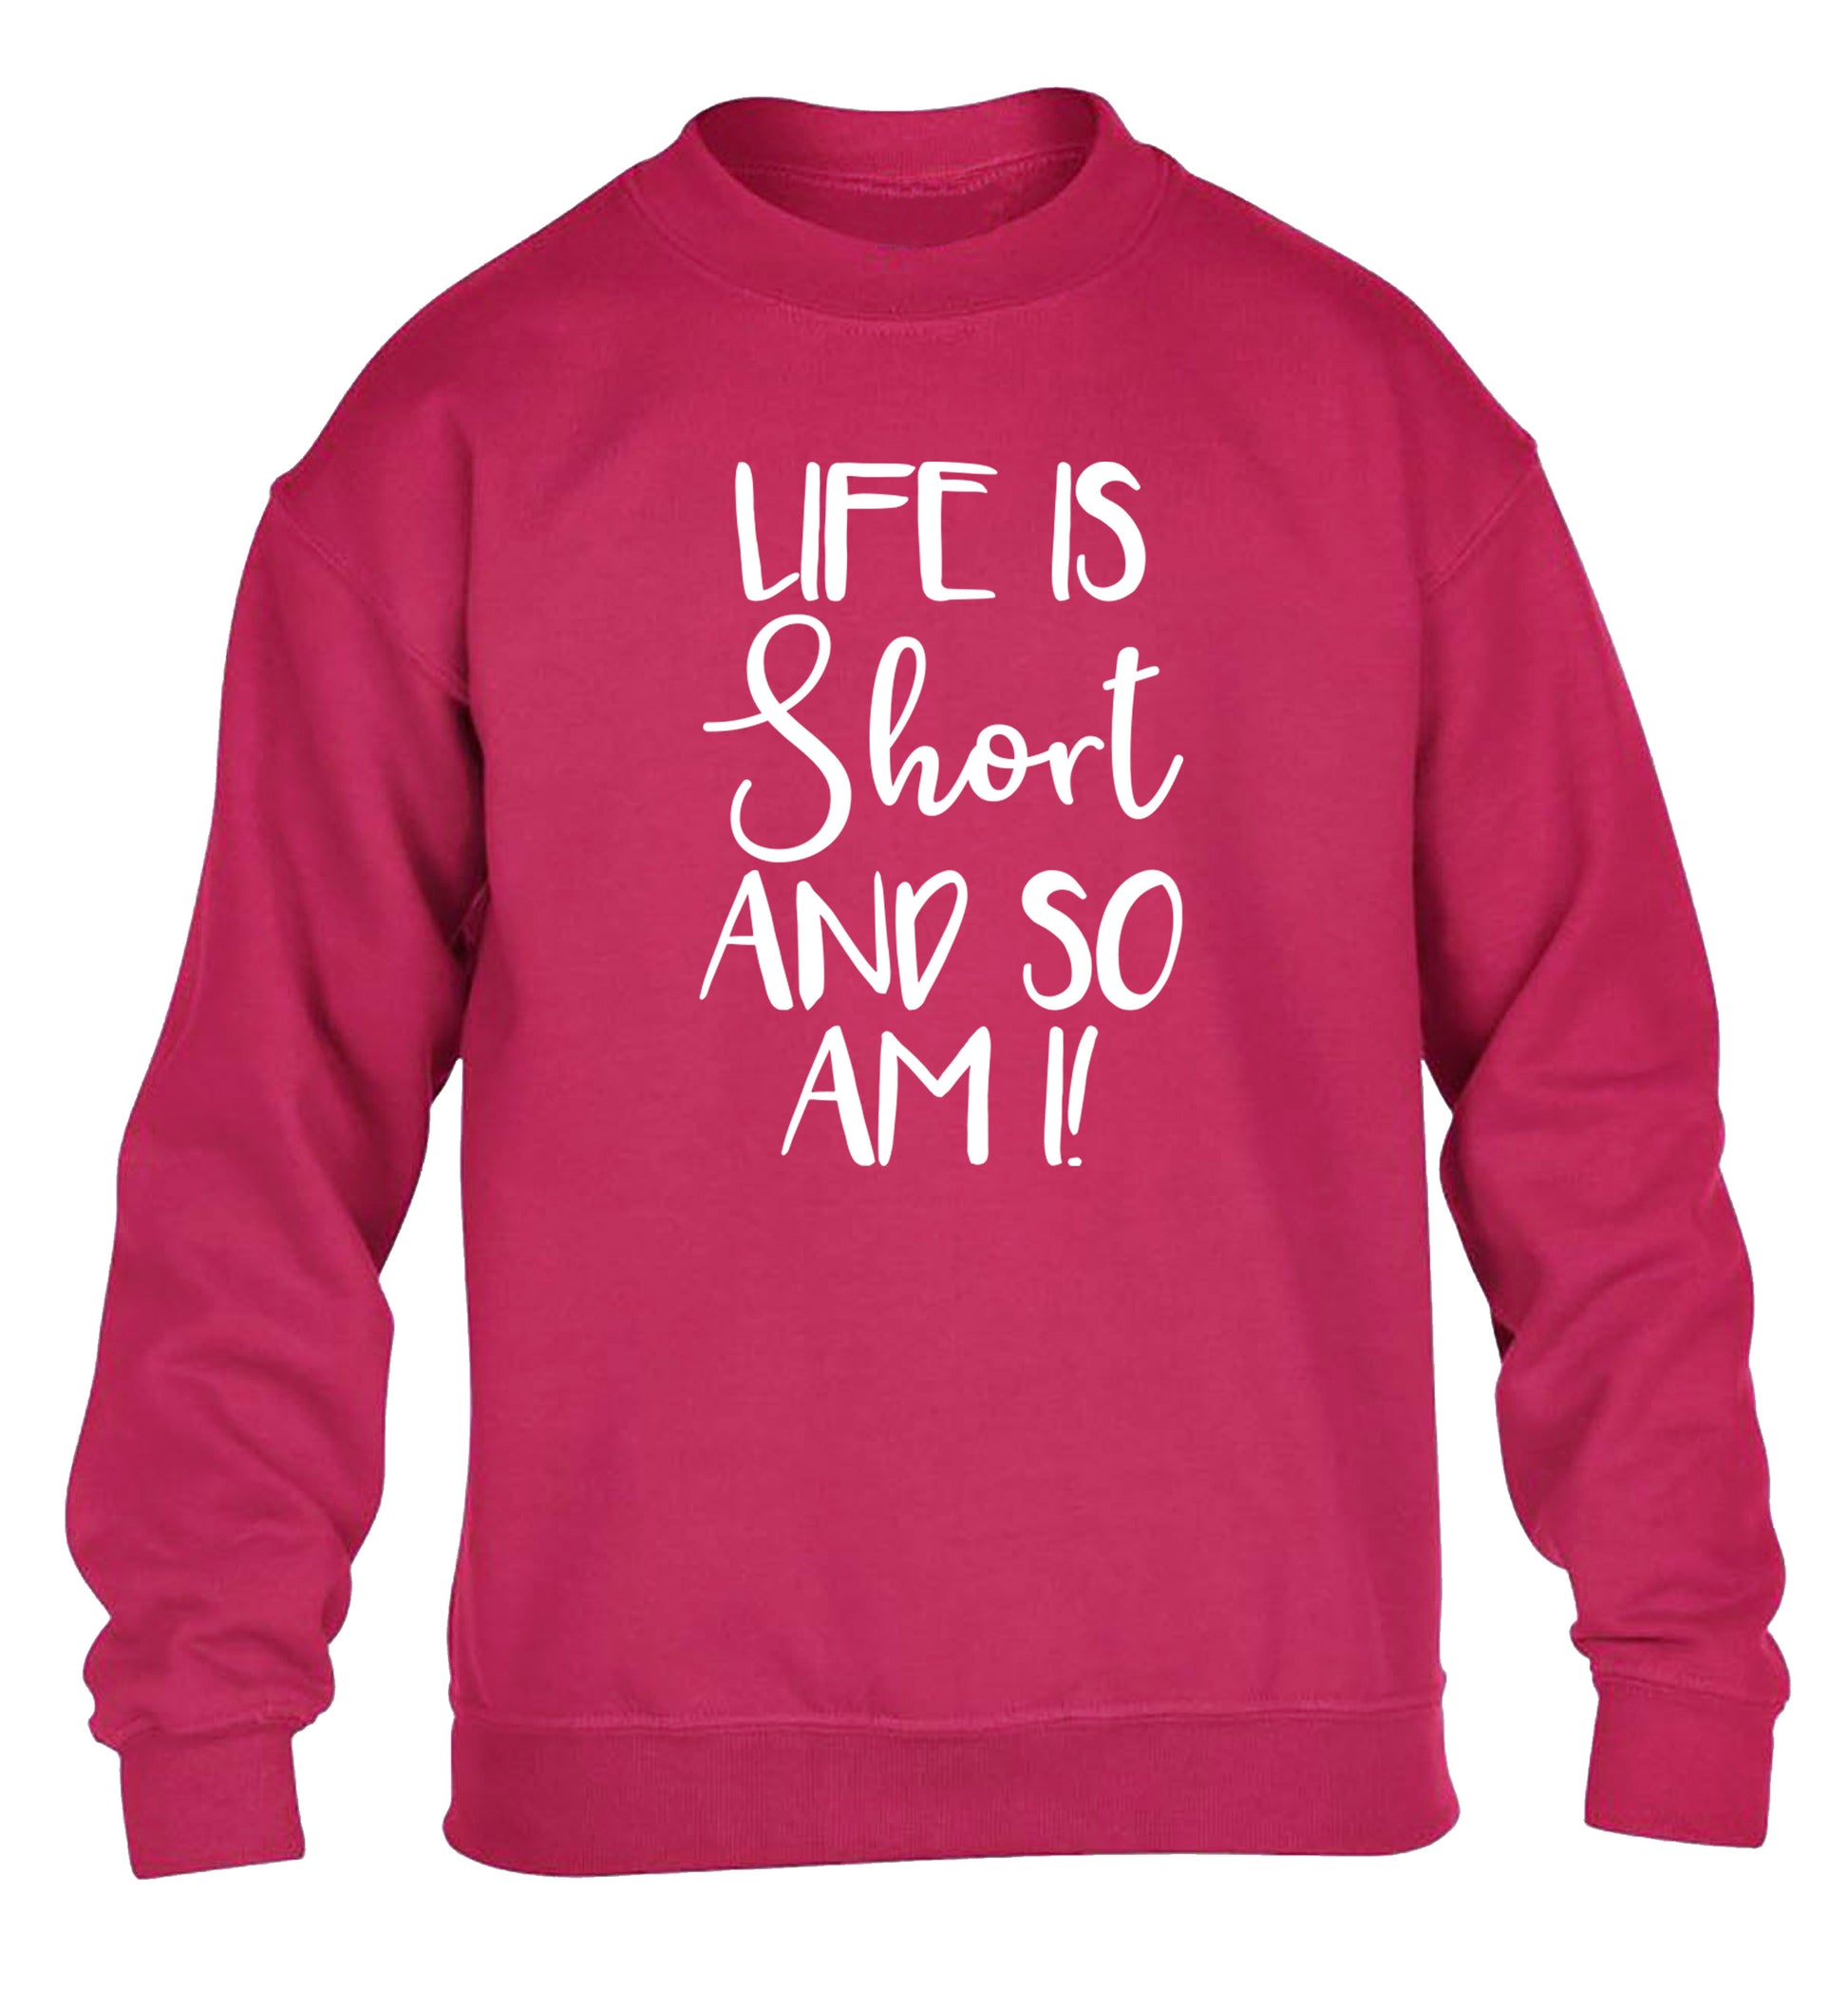 Life is short and so am I! children's pink sweater 12-13 Years